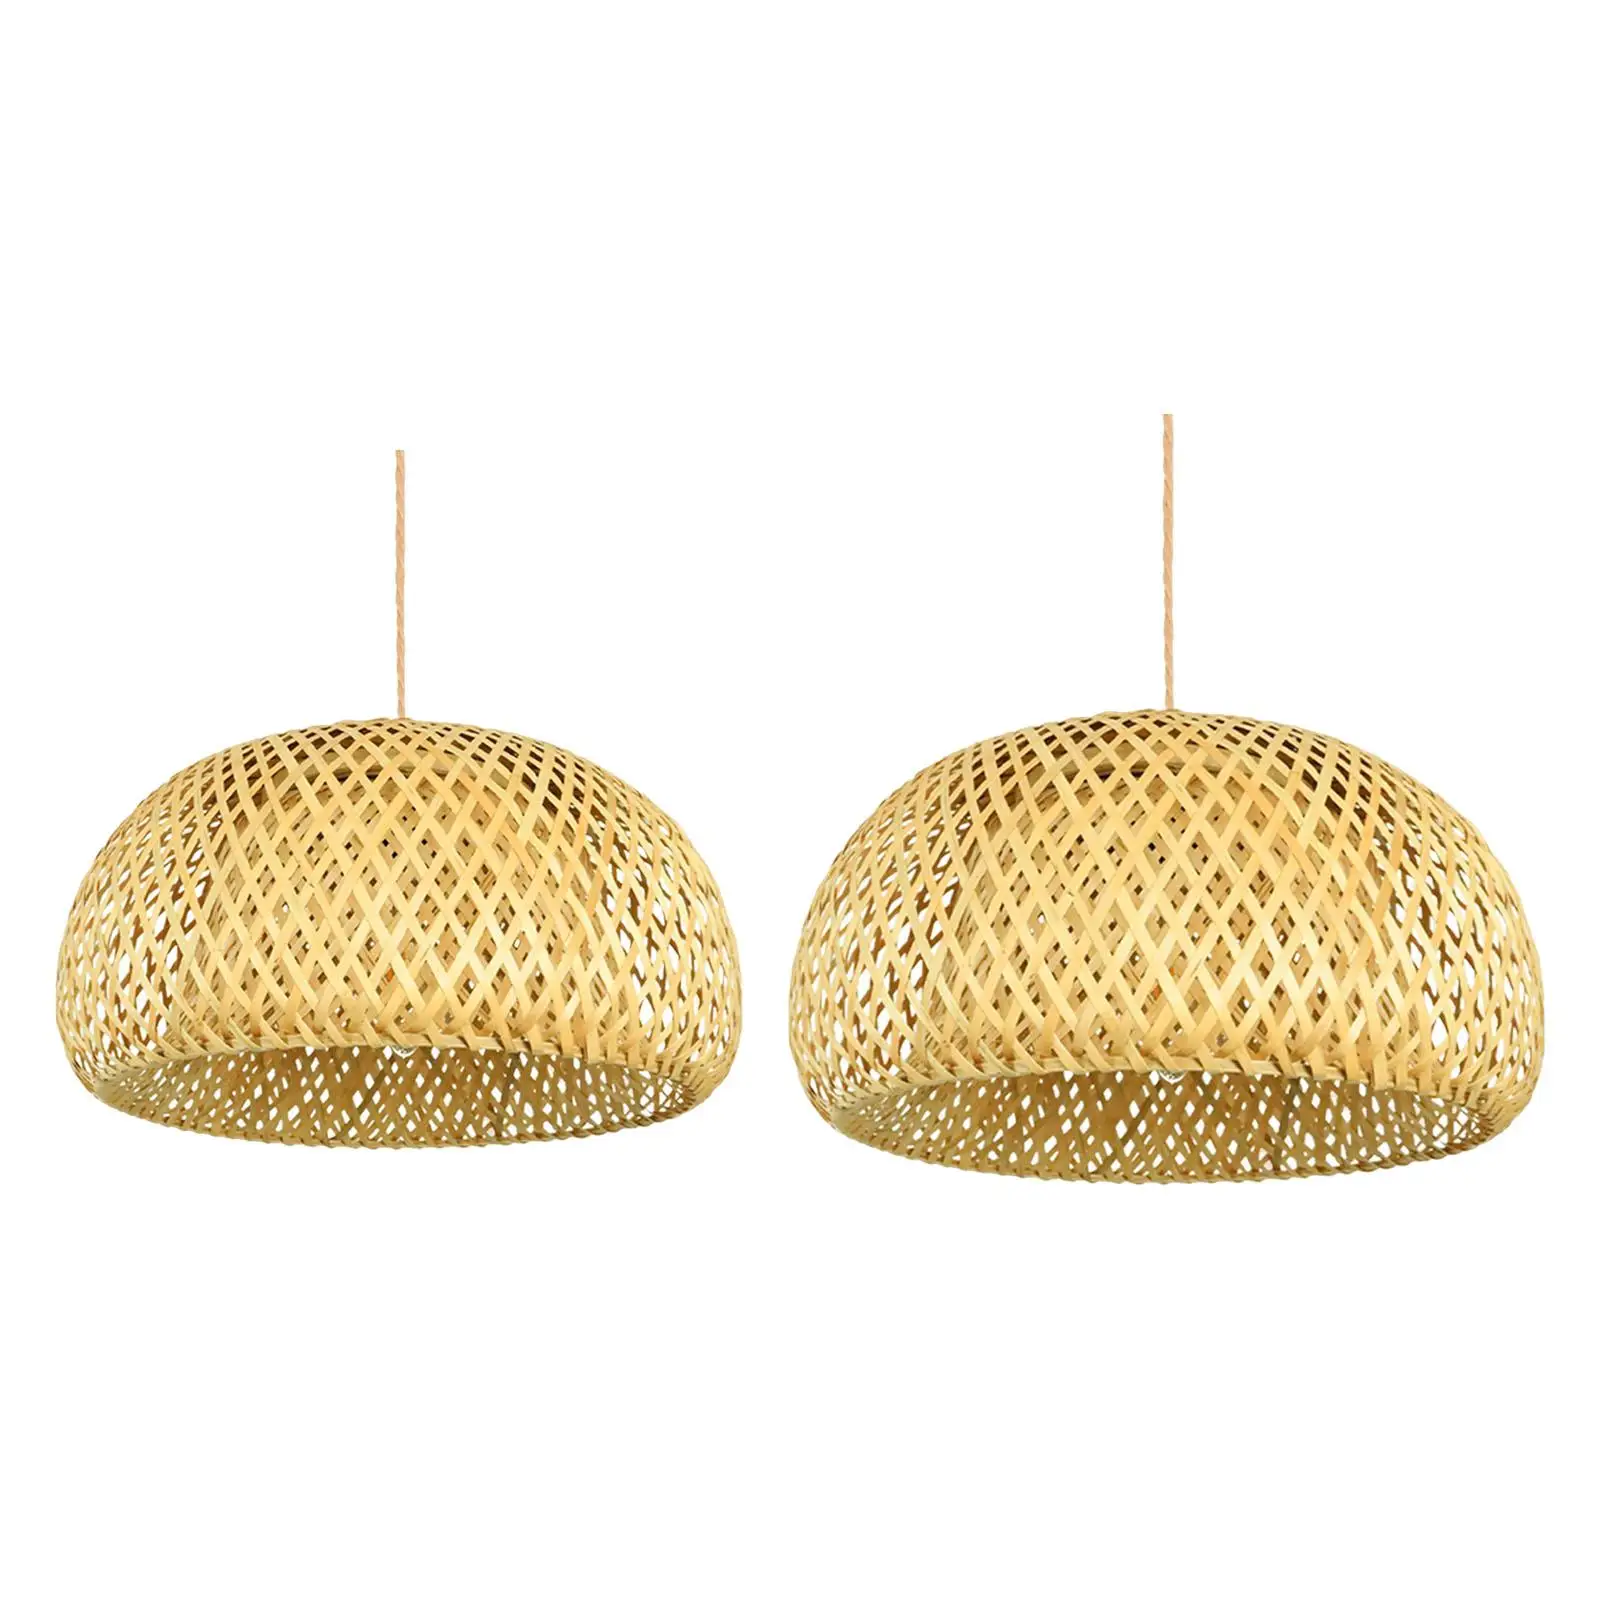 Woven Bamboo Ceiling Lights Lampshade Pendant Light Cover Natural Pendant Hanging Light Lampshade for Bar Shop Office Restaurant